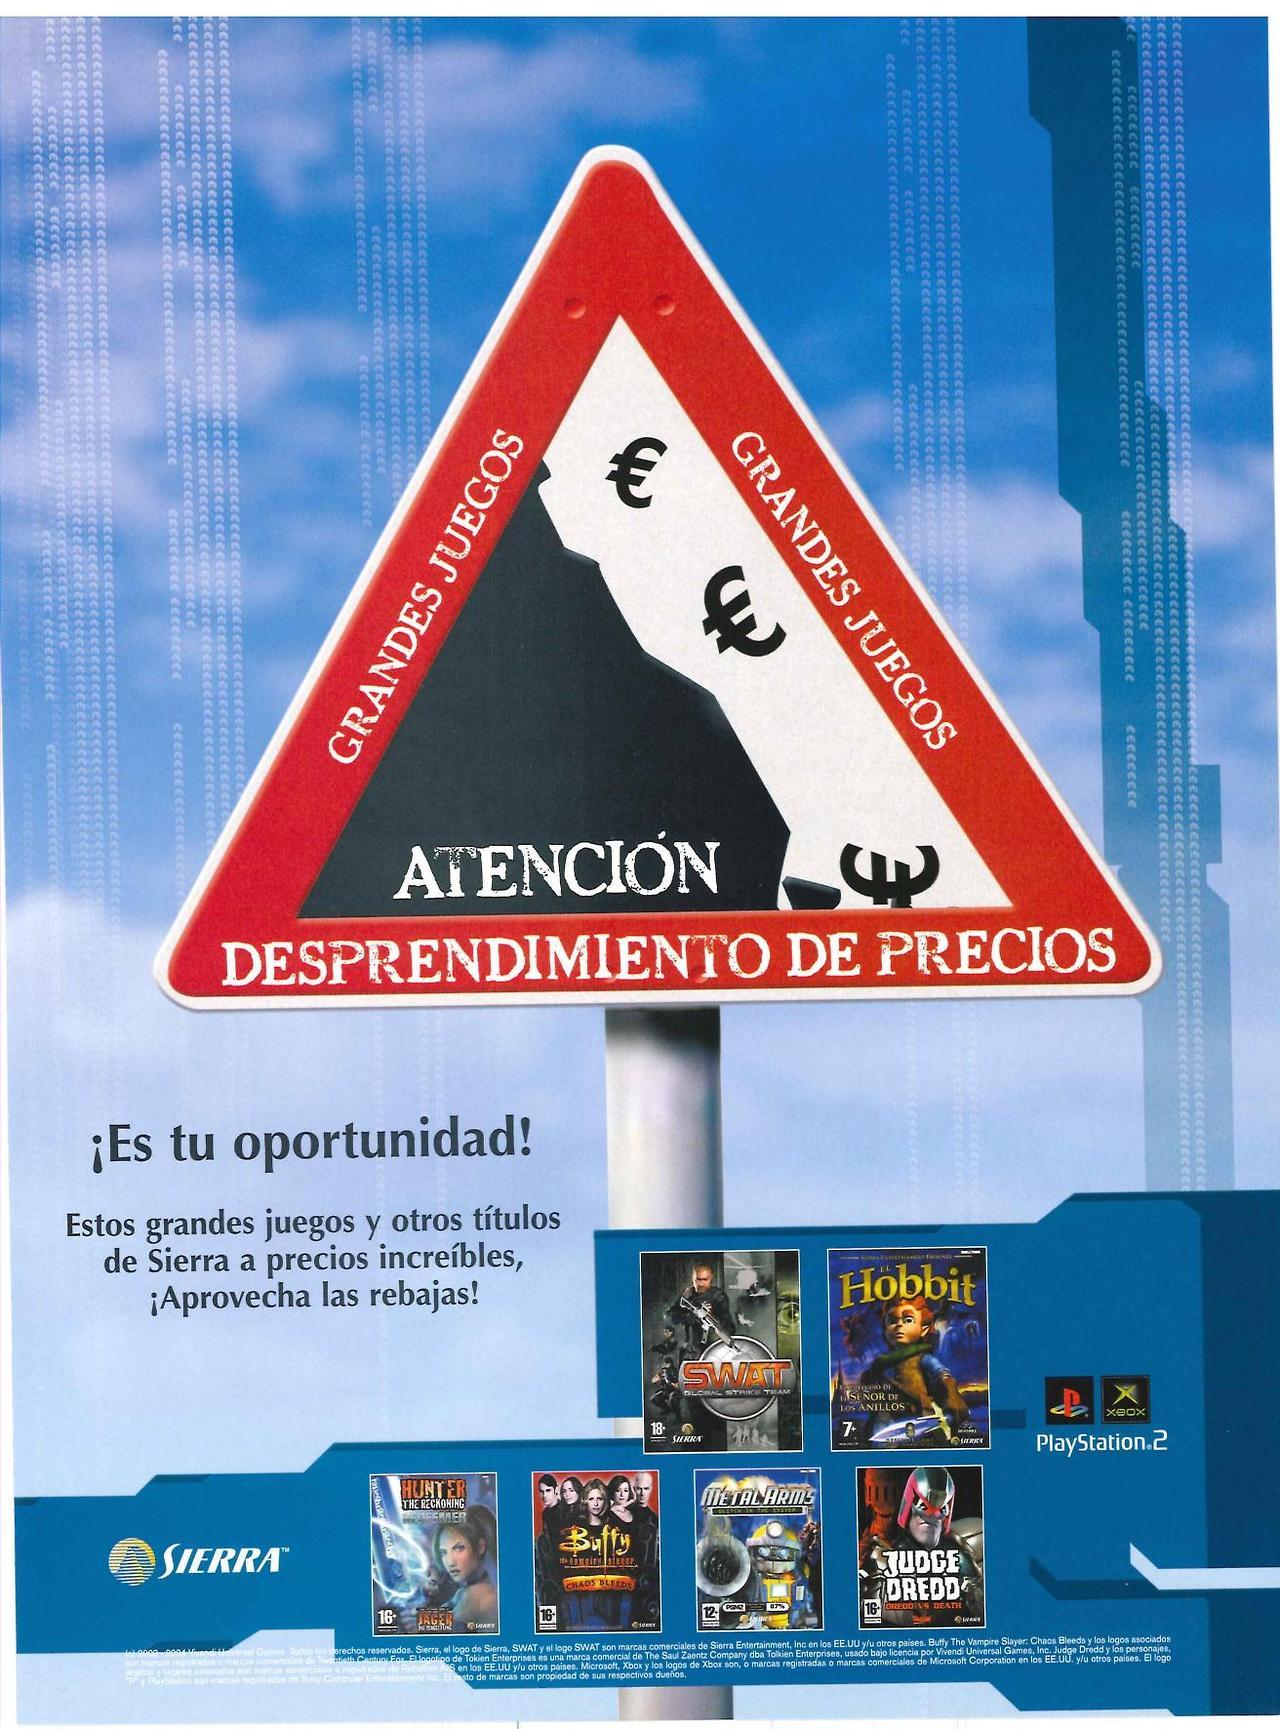 ‘Sierra - “Warning: Falling Prices”‘
[’SWAT: Global Strike Team’, ‘The Hobbit’, ‘Hunter: The Reckoning - Redeemer’, ‘Buffy the Vampire Slayer: Chaos Bleeds’, ‘Metal Arms: Glitch in the System’, ‘Judge Dredd: Dredd vs. Death’] [PS2 / XBOX] [SPAIN]...